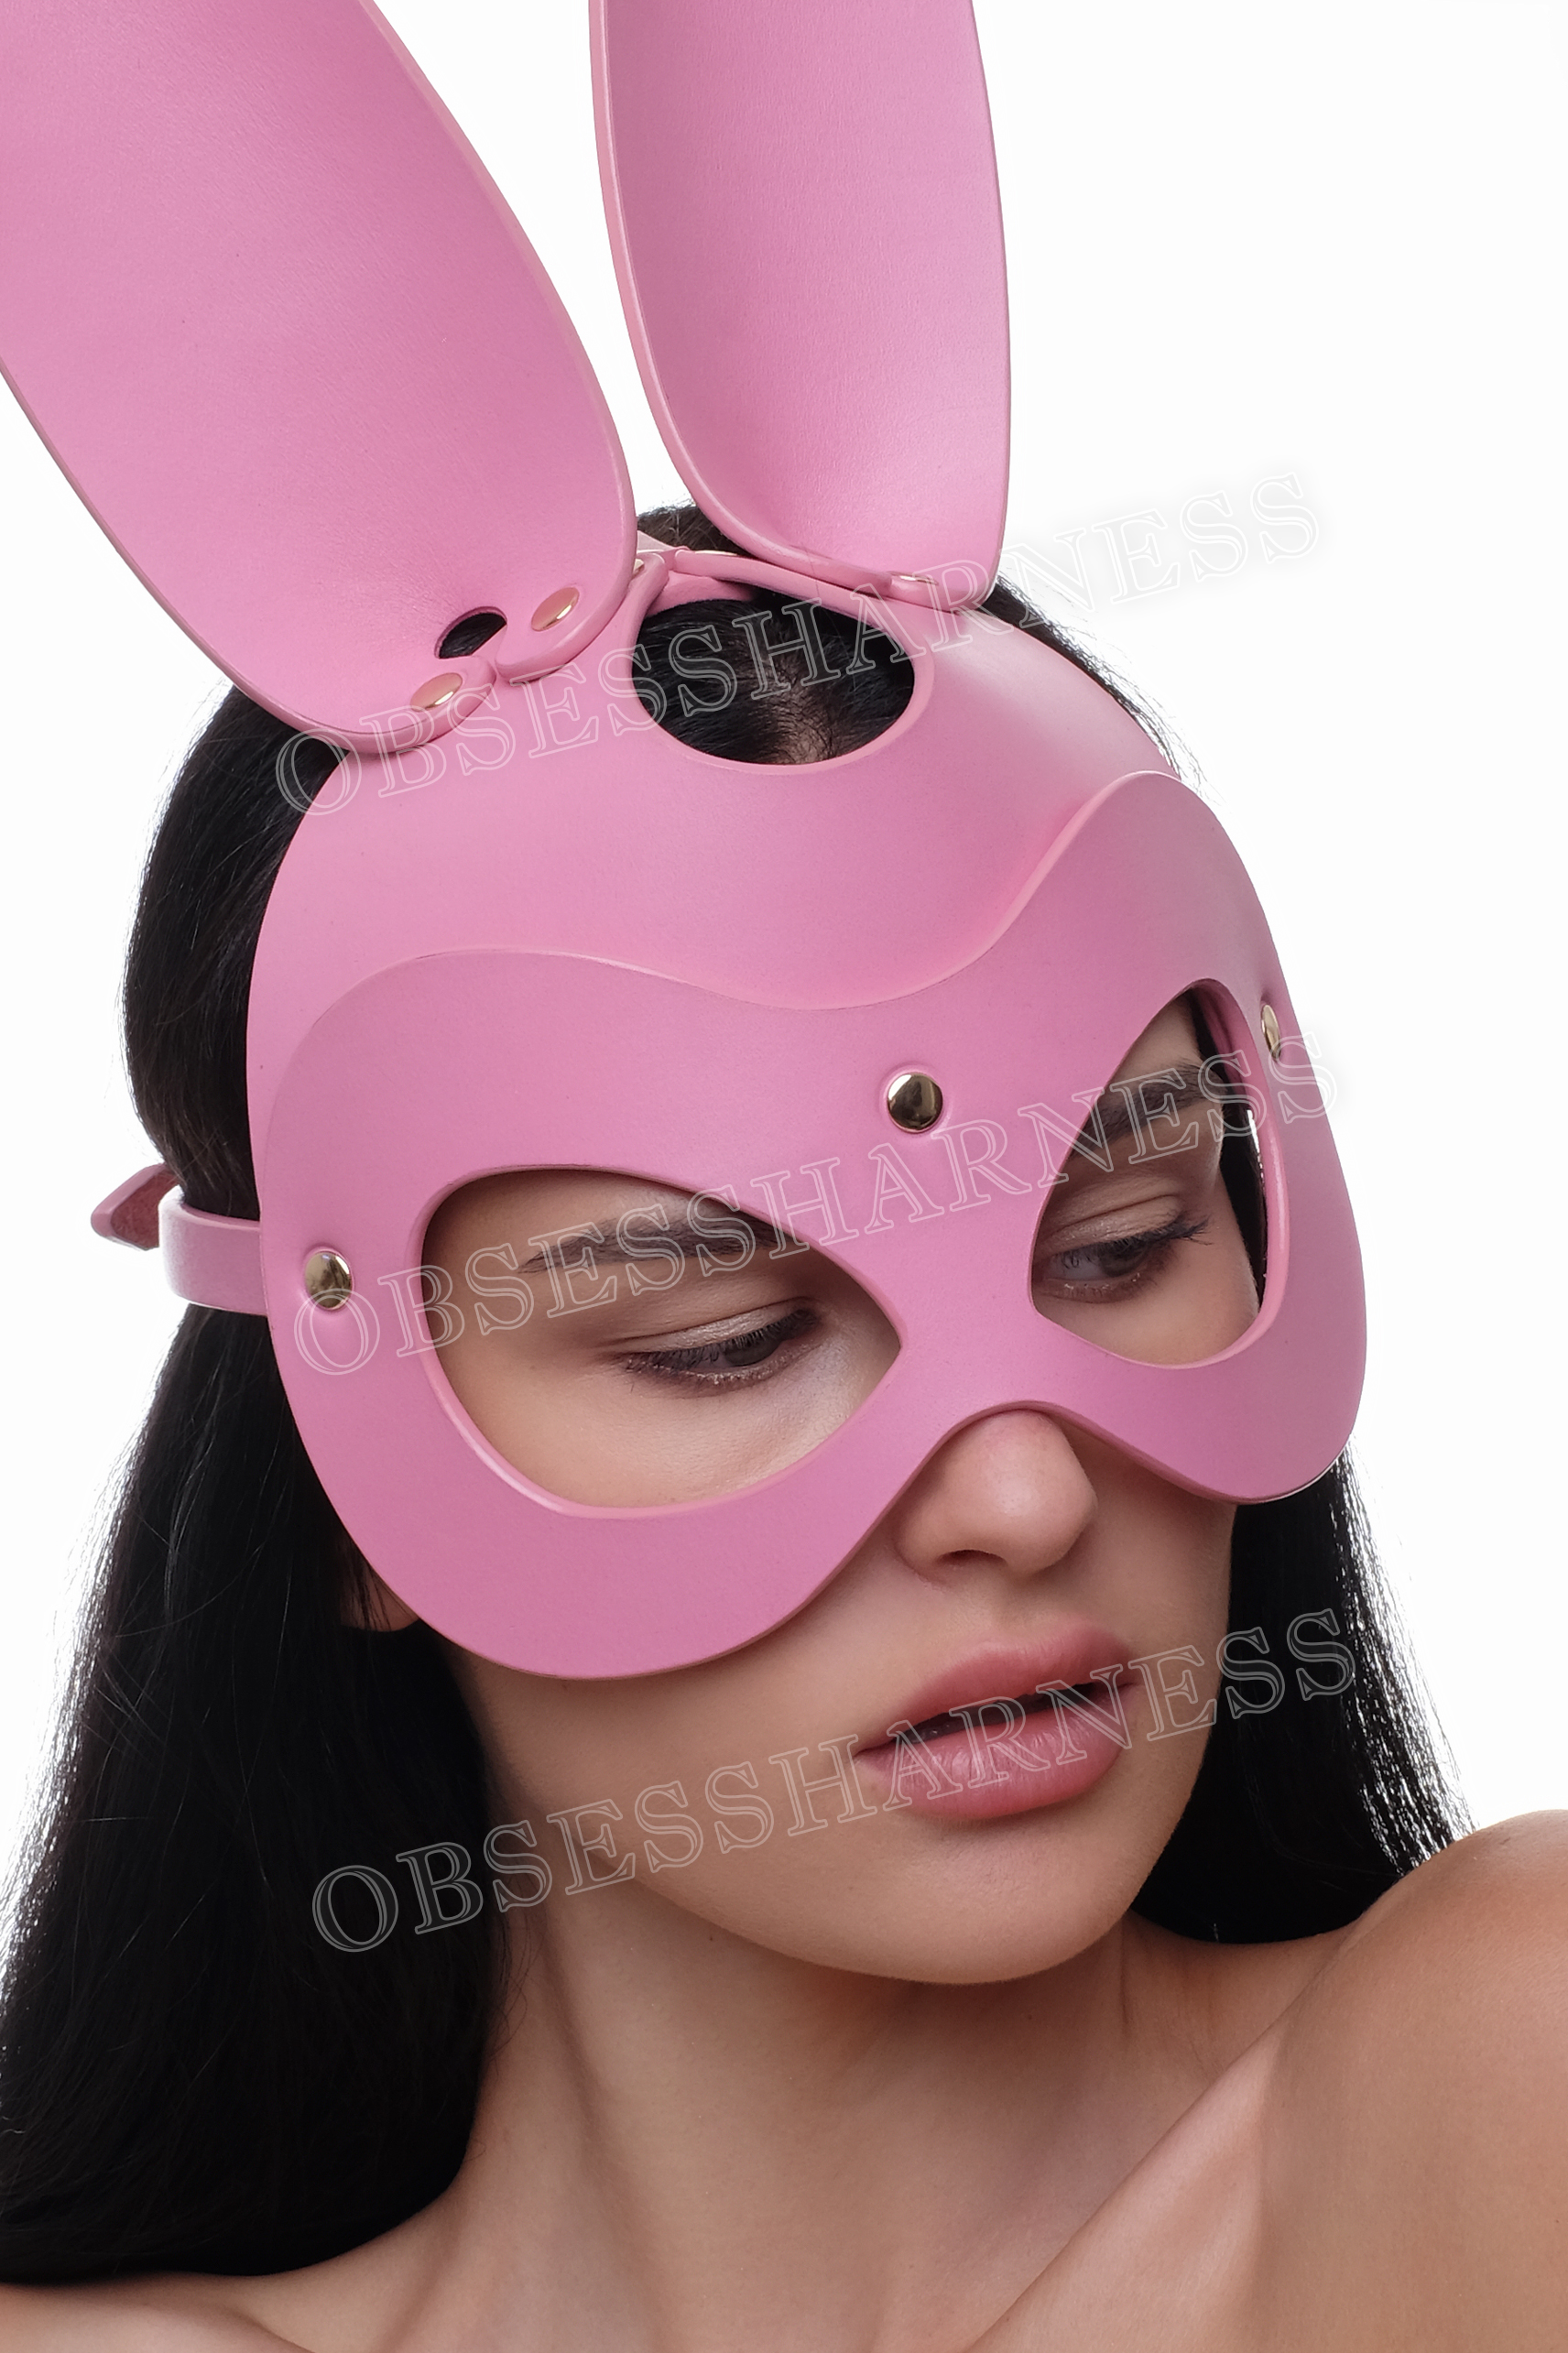 Leather cosplay bunny mask pink close-up for half the face with cutouts for the eyes and a clasp at the back for a kink party